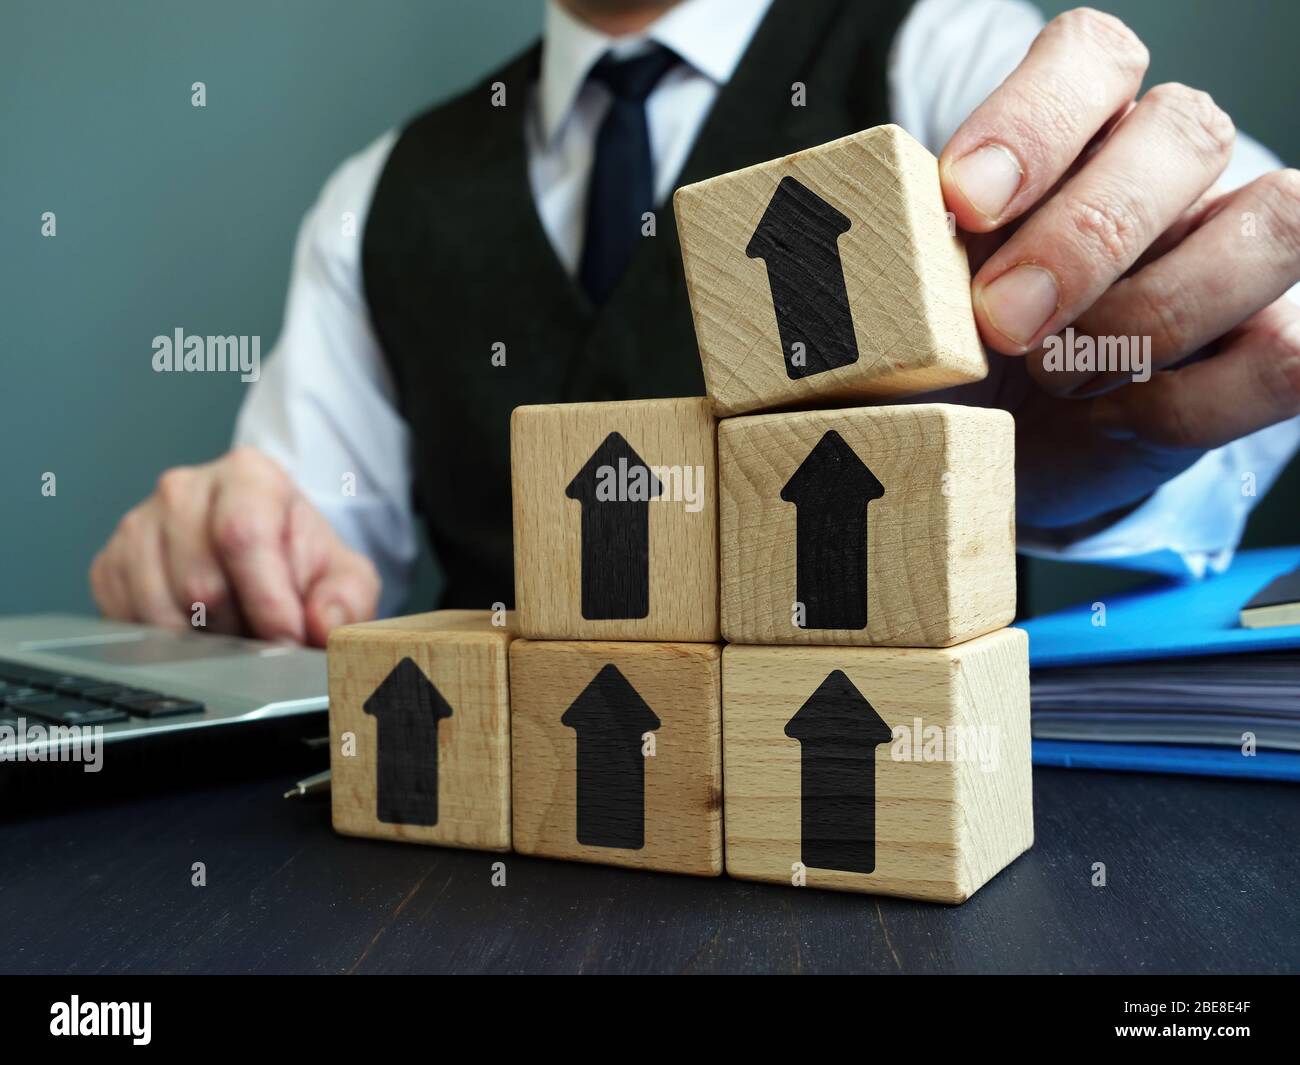 Growth business concept. Businessman makes ladder of success from blocks with arrows. Stock Photo